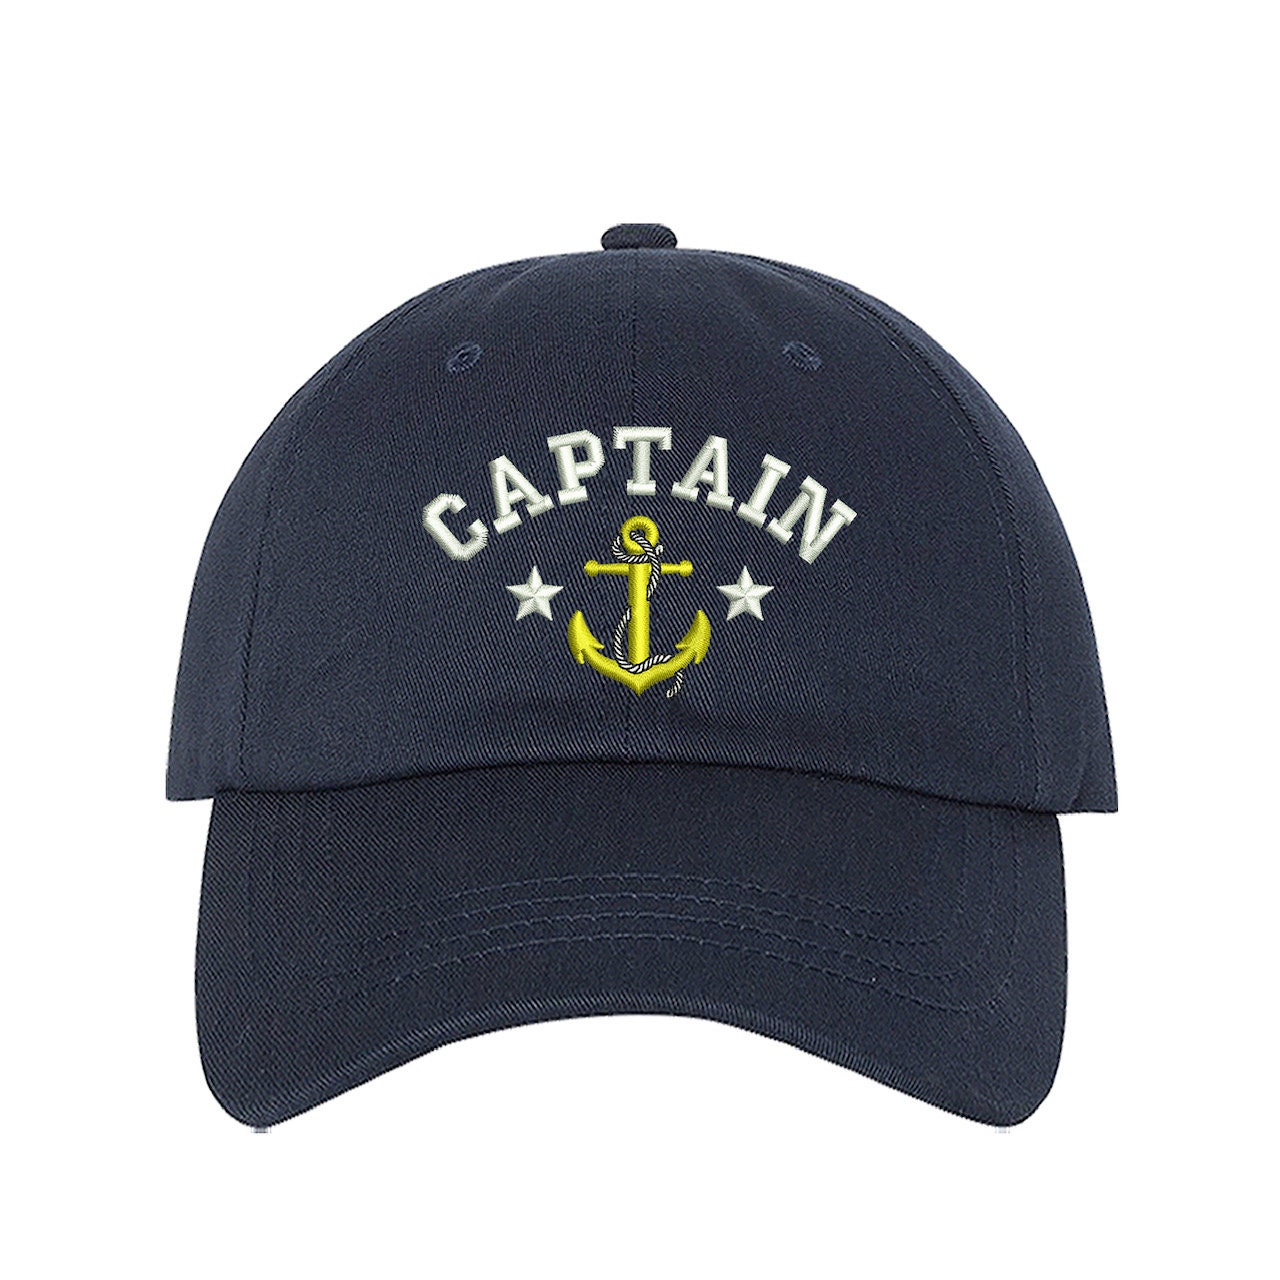 Captain Hat For Baby Boy